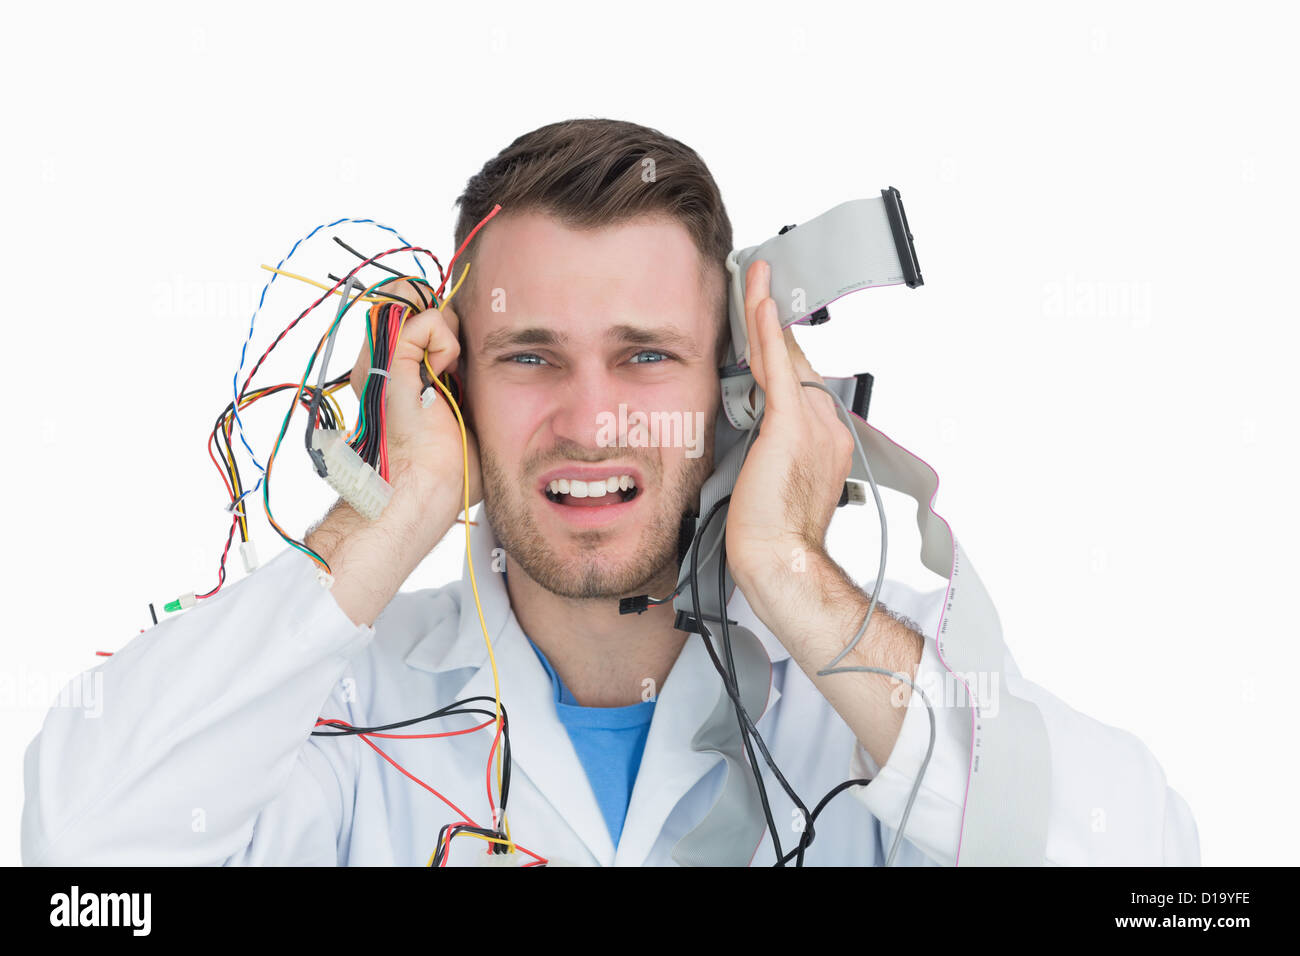 Young it professional yelling with cables in hands Stock Photo